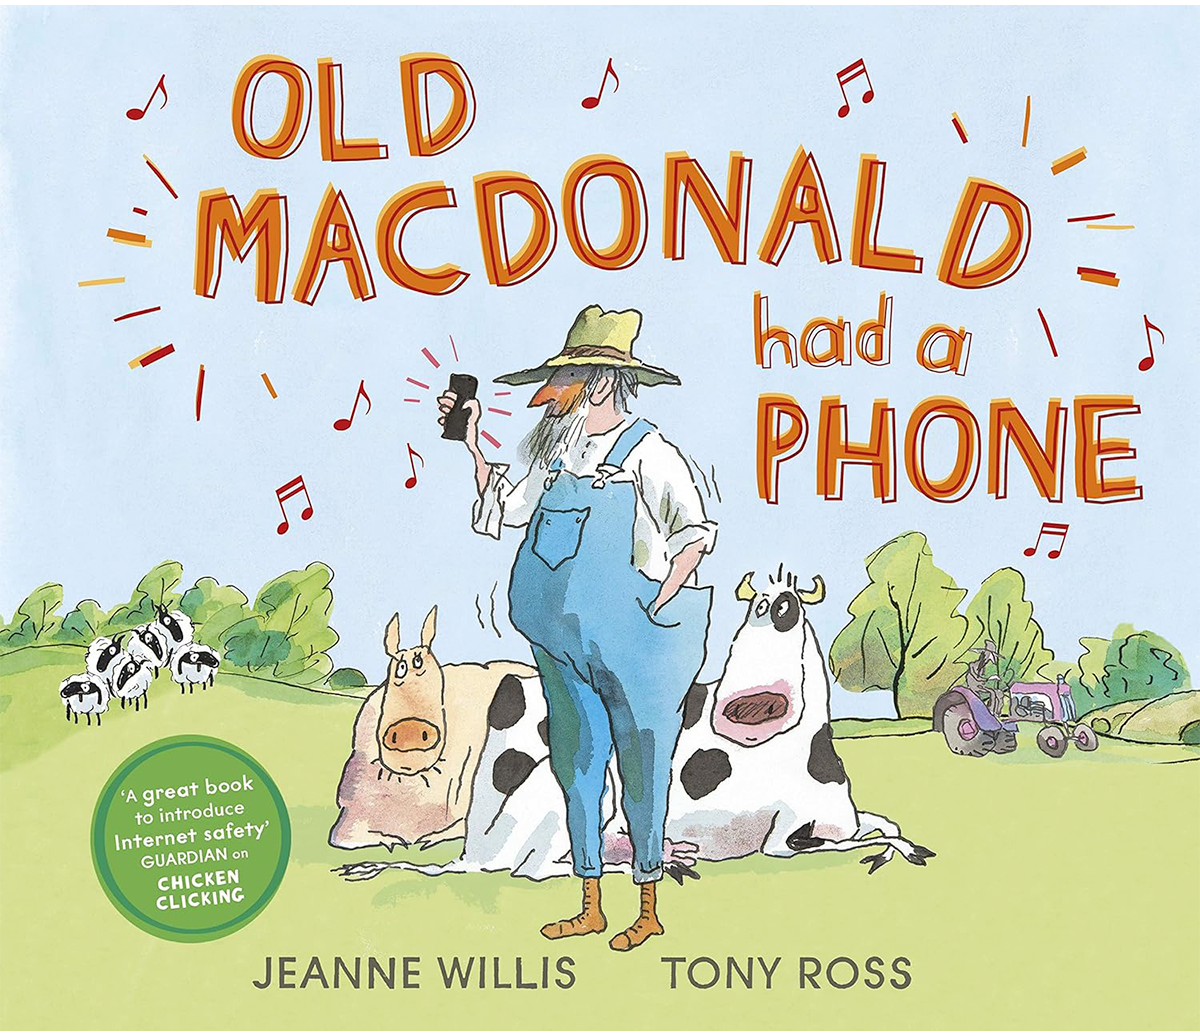 jeanne-willis-old-macdonald-had-a-phone.png